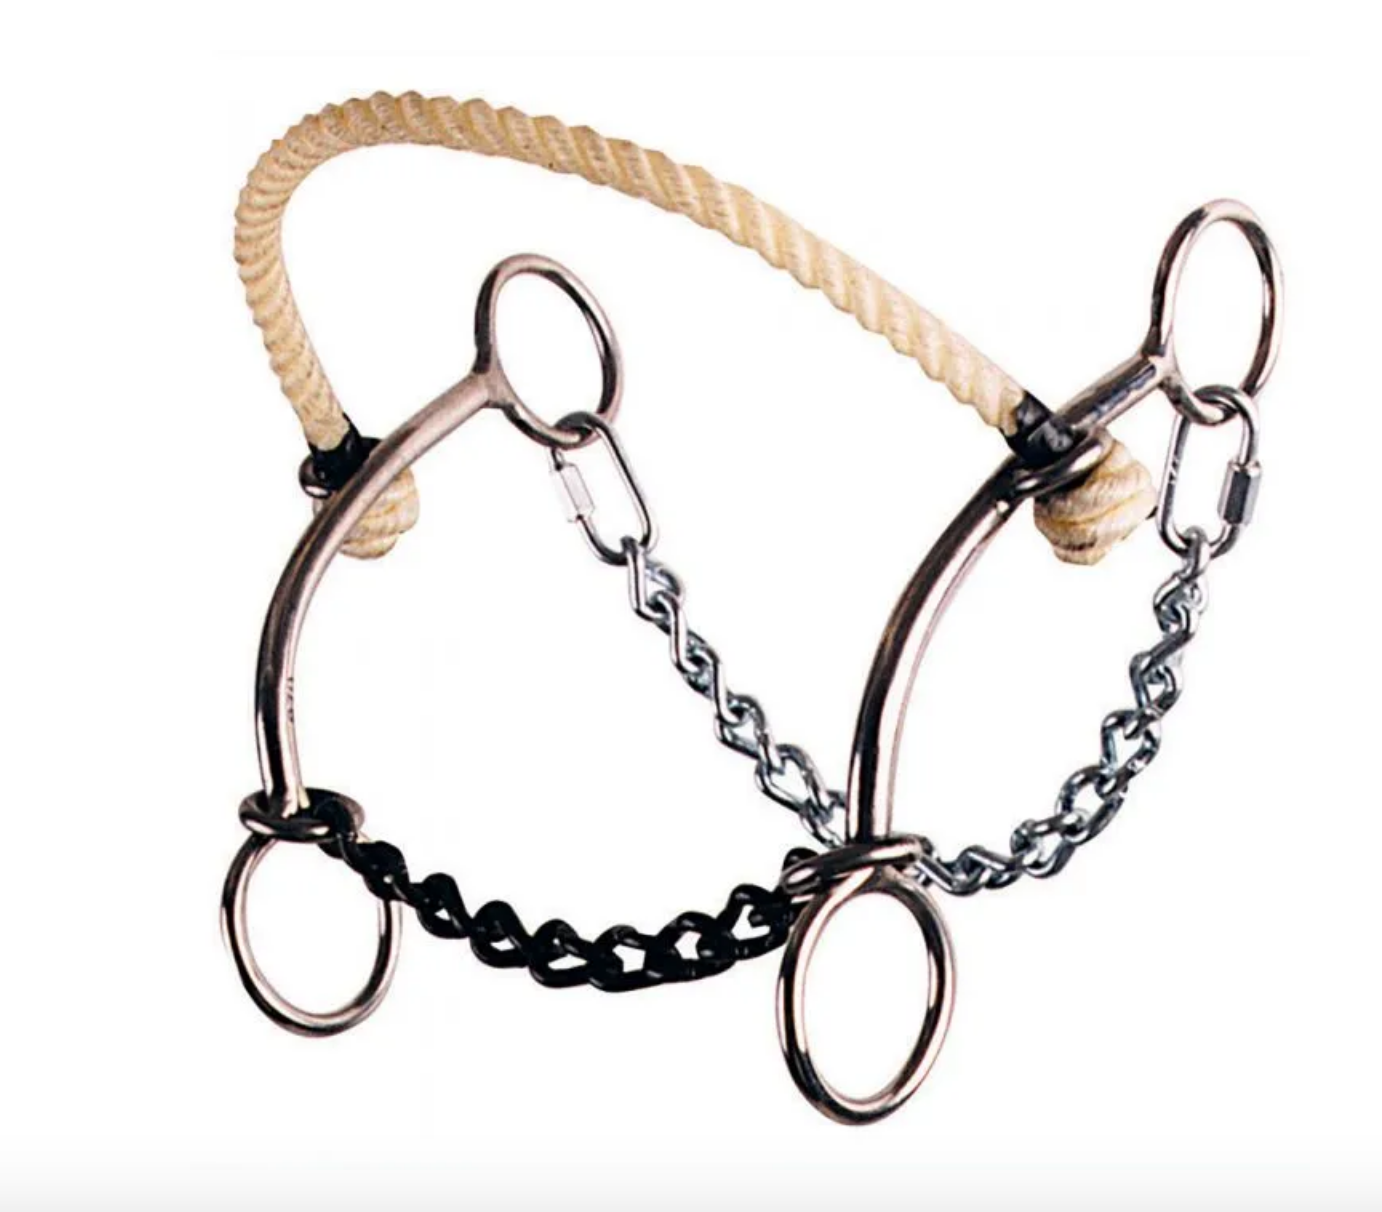 The Reinsman Johnson hack combination bit is not actually a hackamore. 